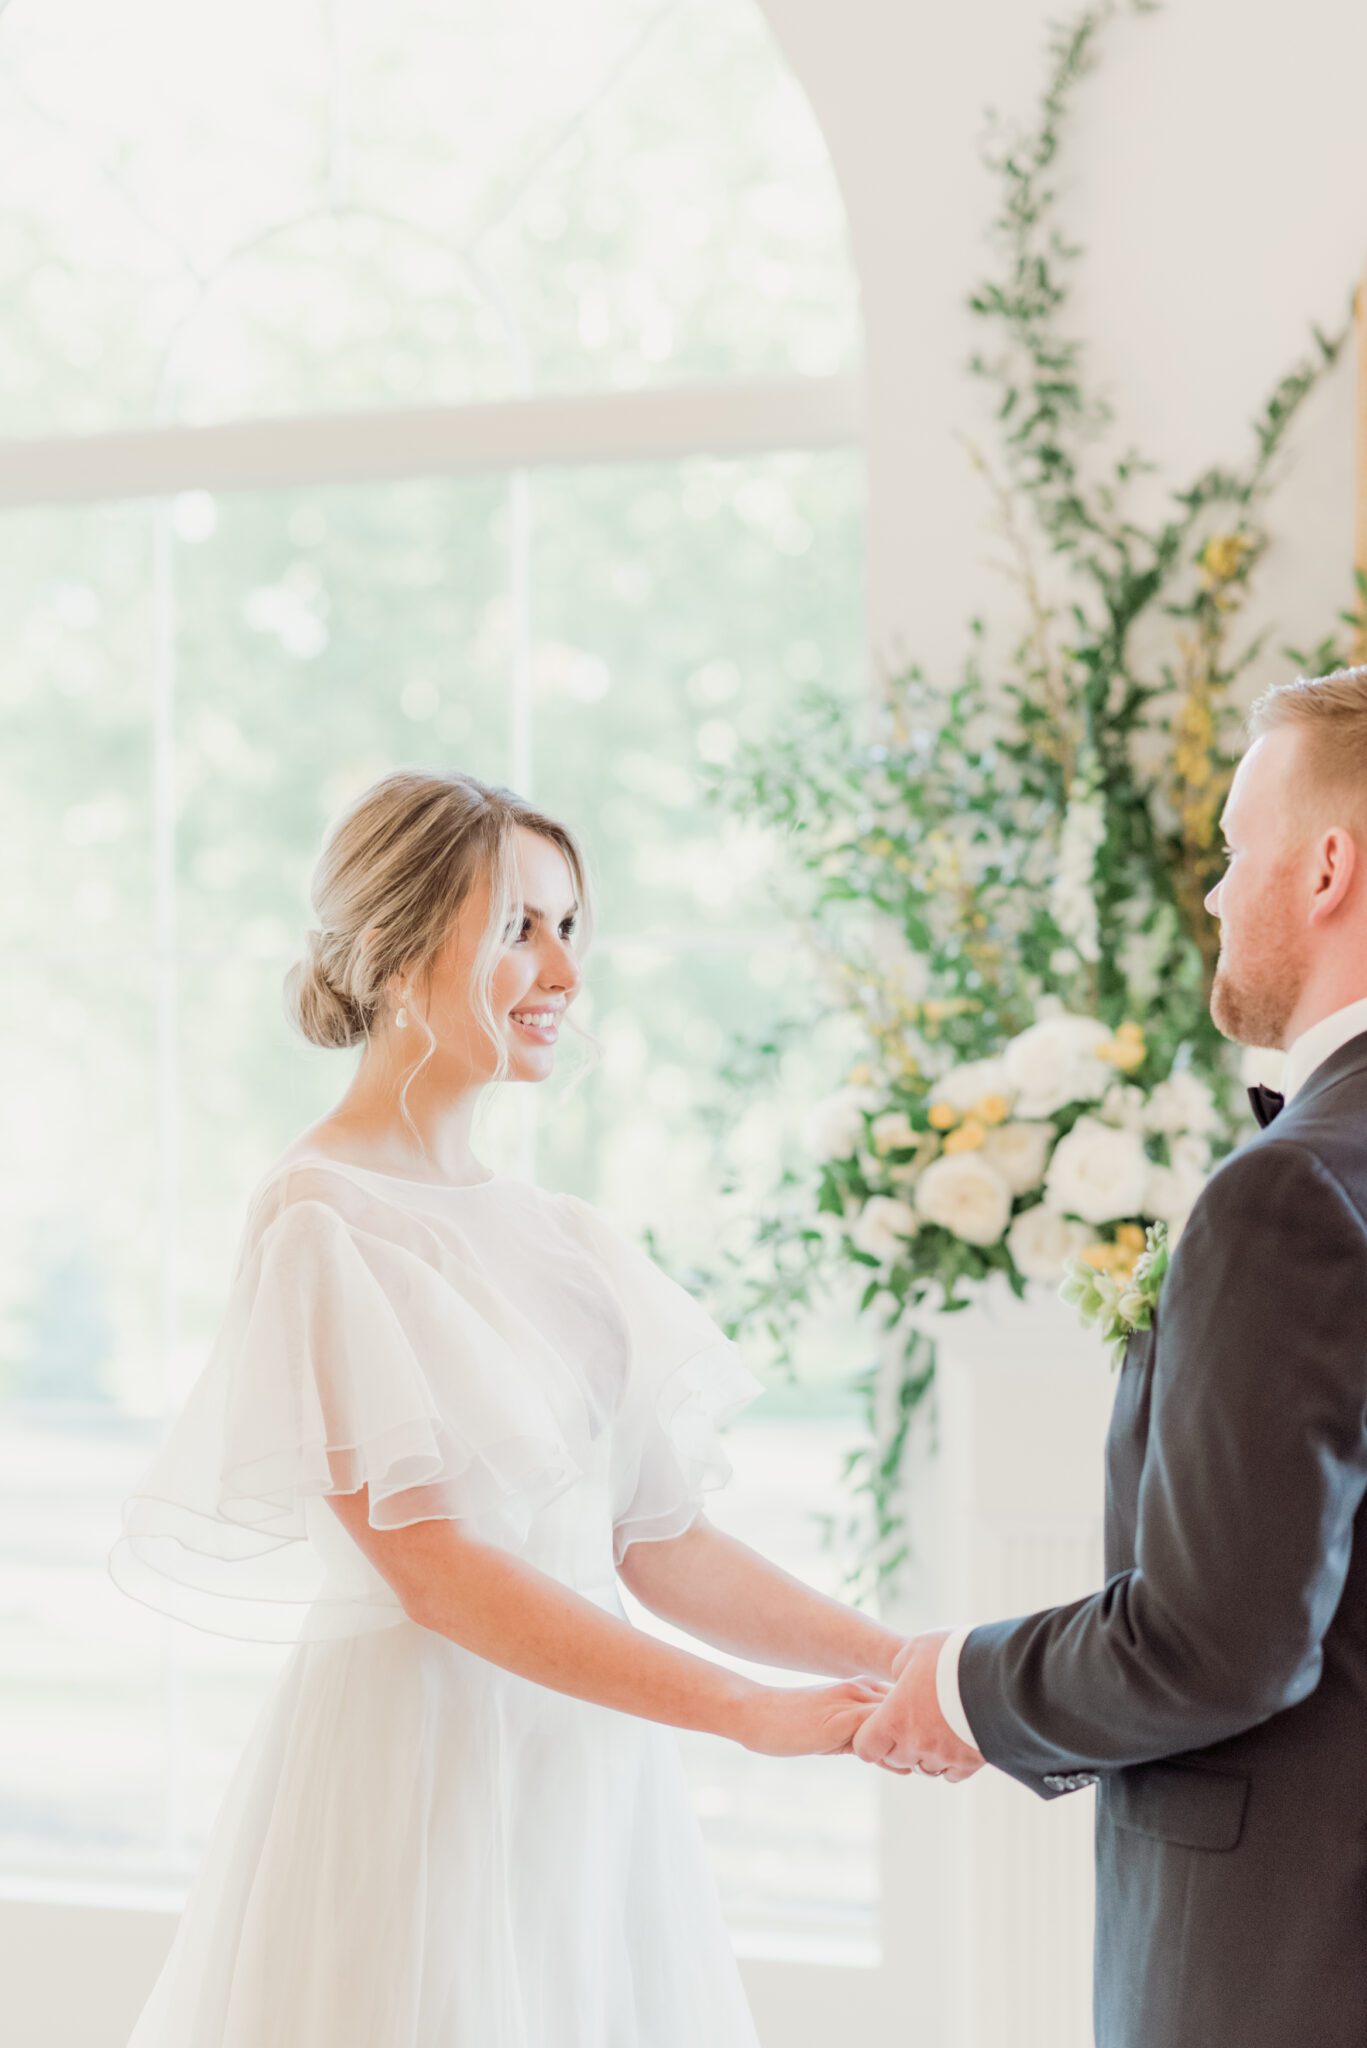 Bride and groom during fine art Indoor wedding ceremony at Sparrow Lane with a lush floral installation climbing up the fireplace. Pale yellow, ivory, white, colour palette. Bride wearing a whimsical yet sophisticated bridal gown.